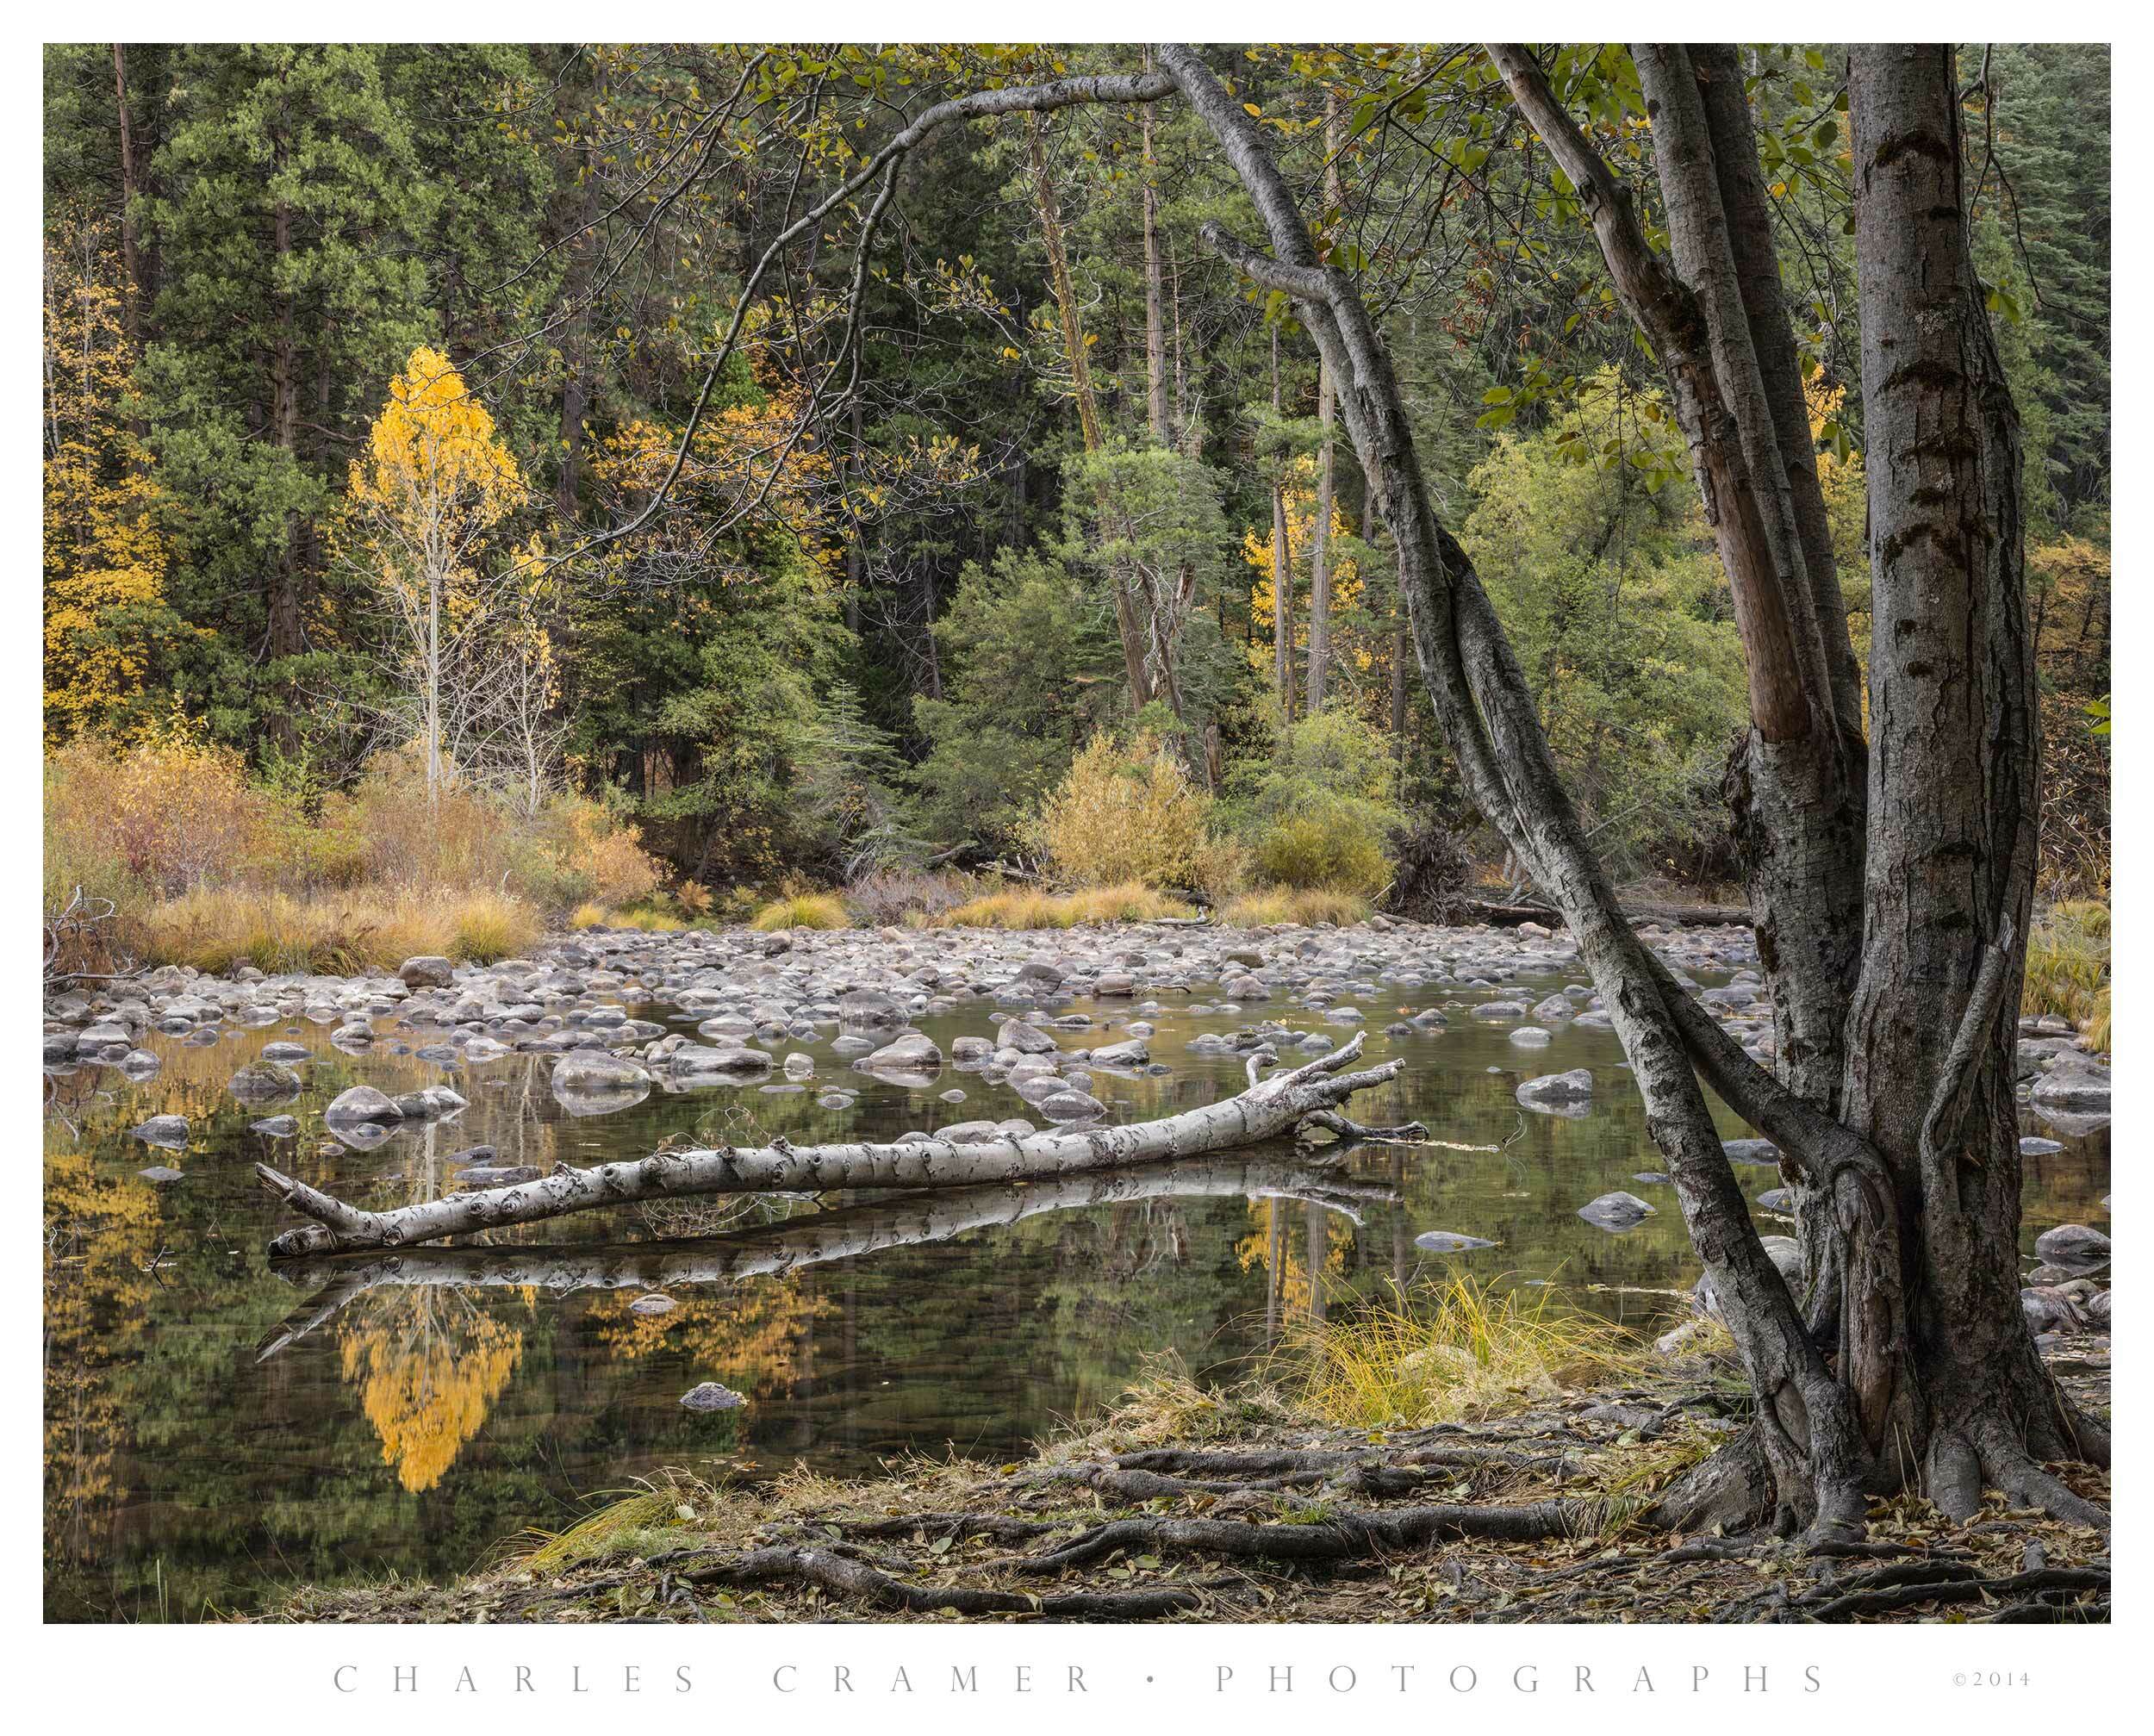 Intertwined Trees, Autumn, Gates of the Valley, Yosemite